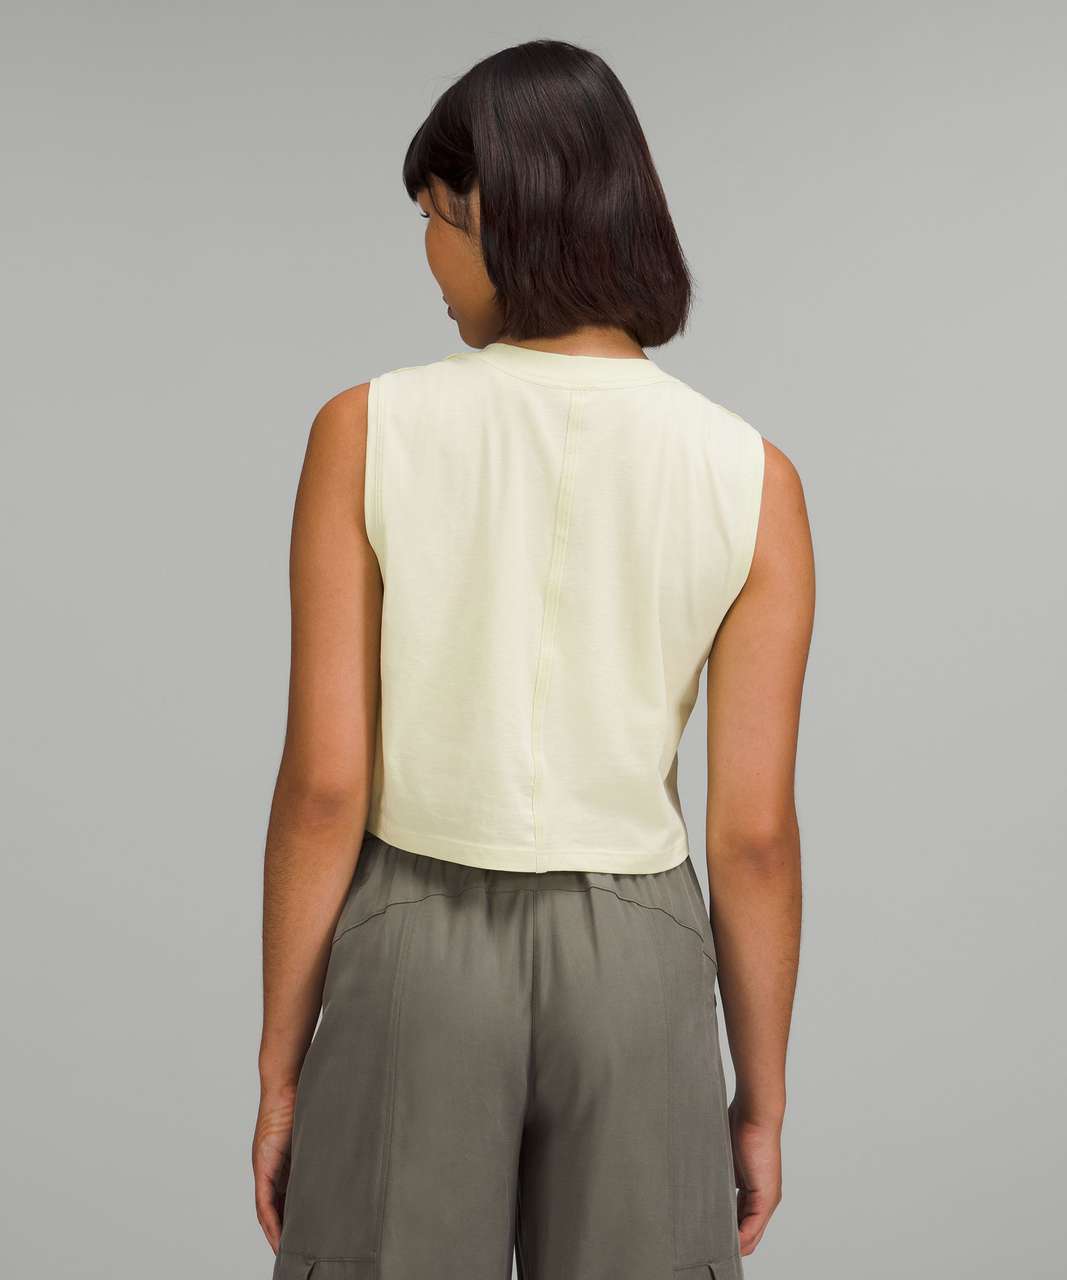 Lululemon All Yours Cropped Cotton Tank Top - Dewy